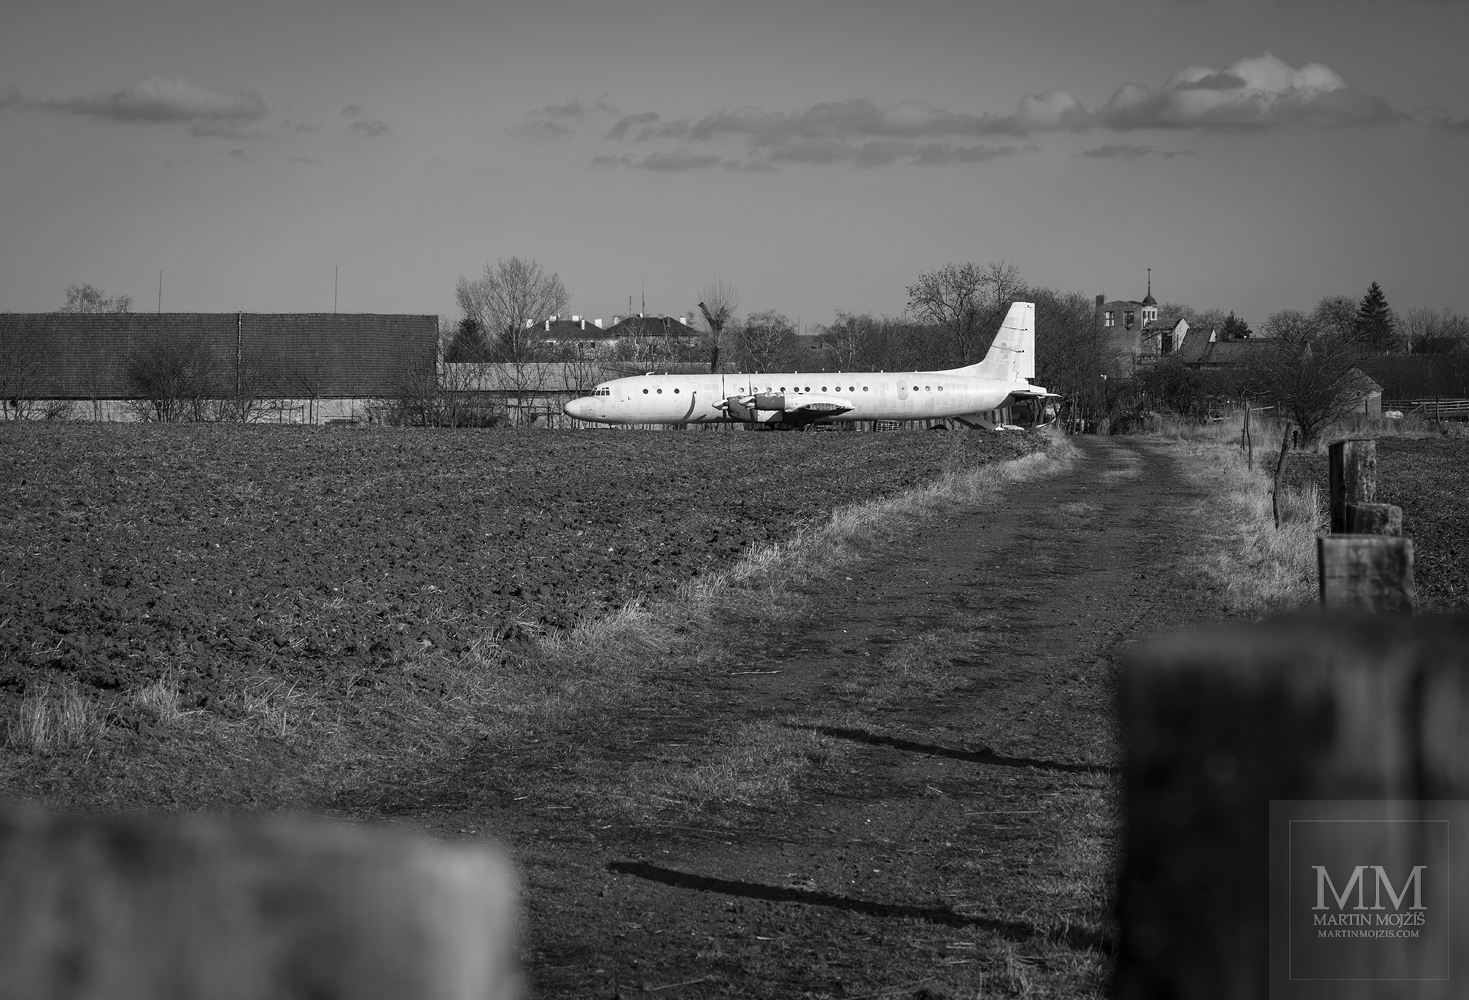 A large white airliner in a field near a farm. Black and white fine art photograph IN THE HALF OF FEBRUARY, photographed by Martin Mojzis.